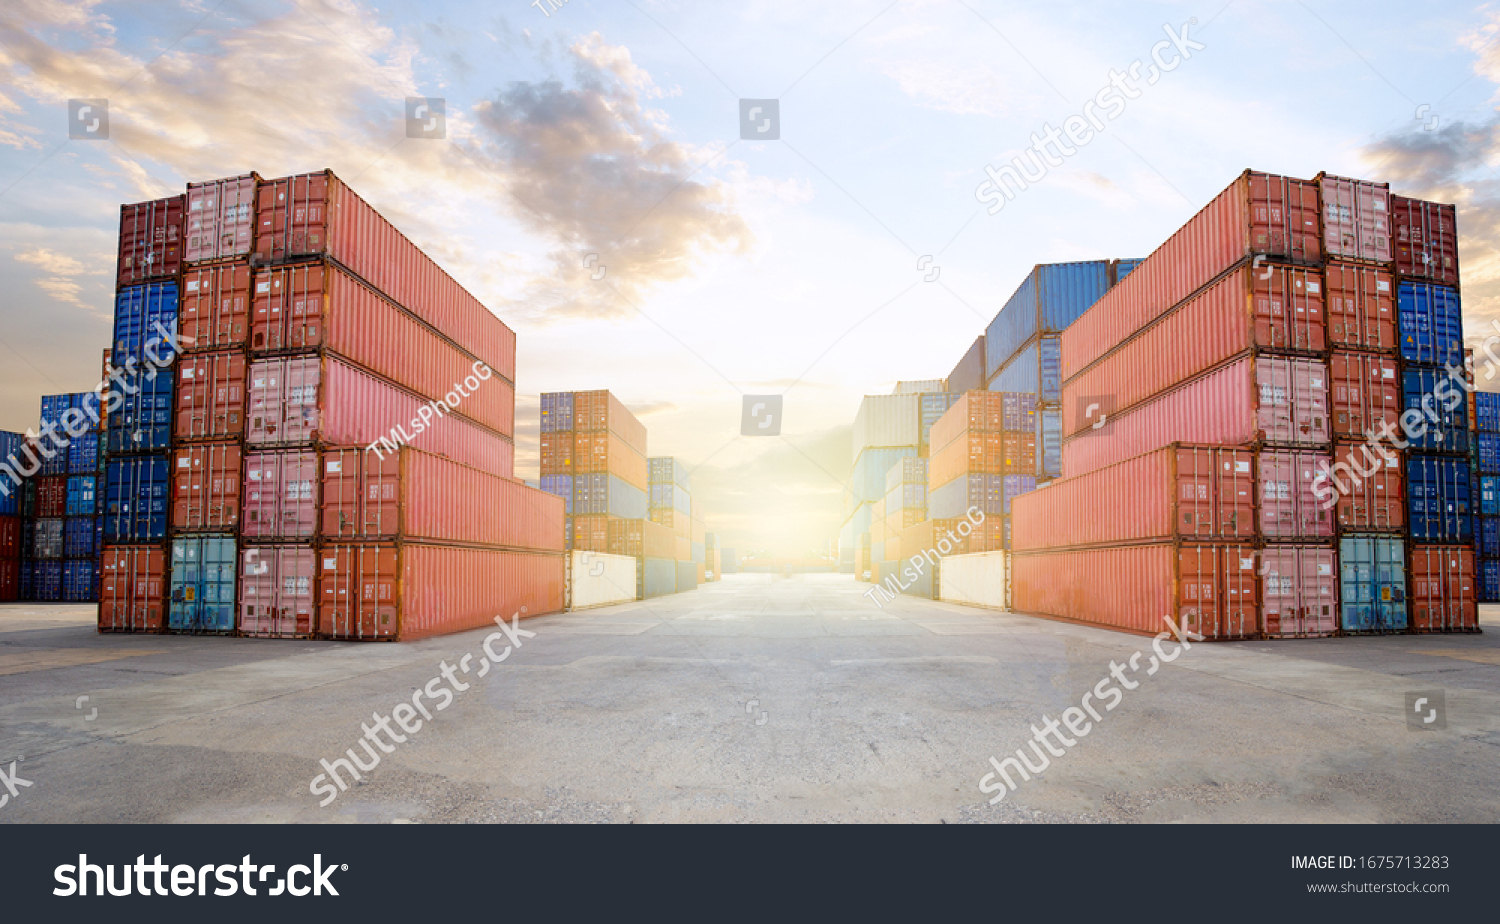 Transportation Logistics of international container cargo shipping and cargo plane in container yard, Freight transportation, International global shipping. #1675713283